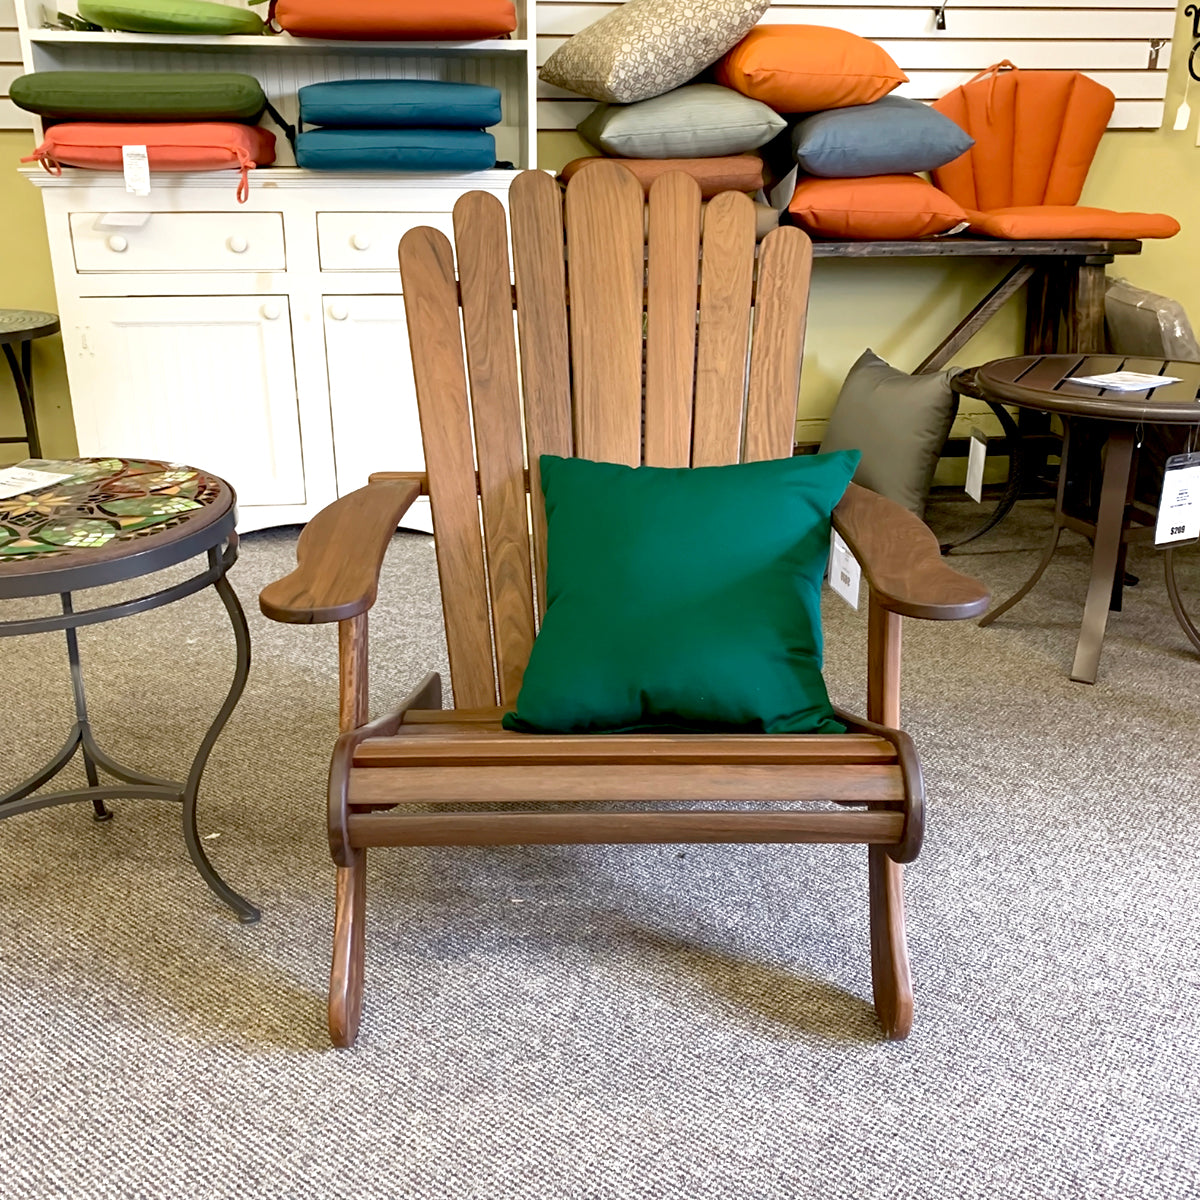 Jensen Leisure Adirondack Chair is available in our Jacobs Custom Living Spokane Valley showroom.